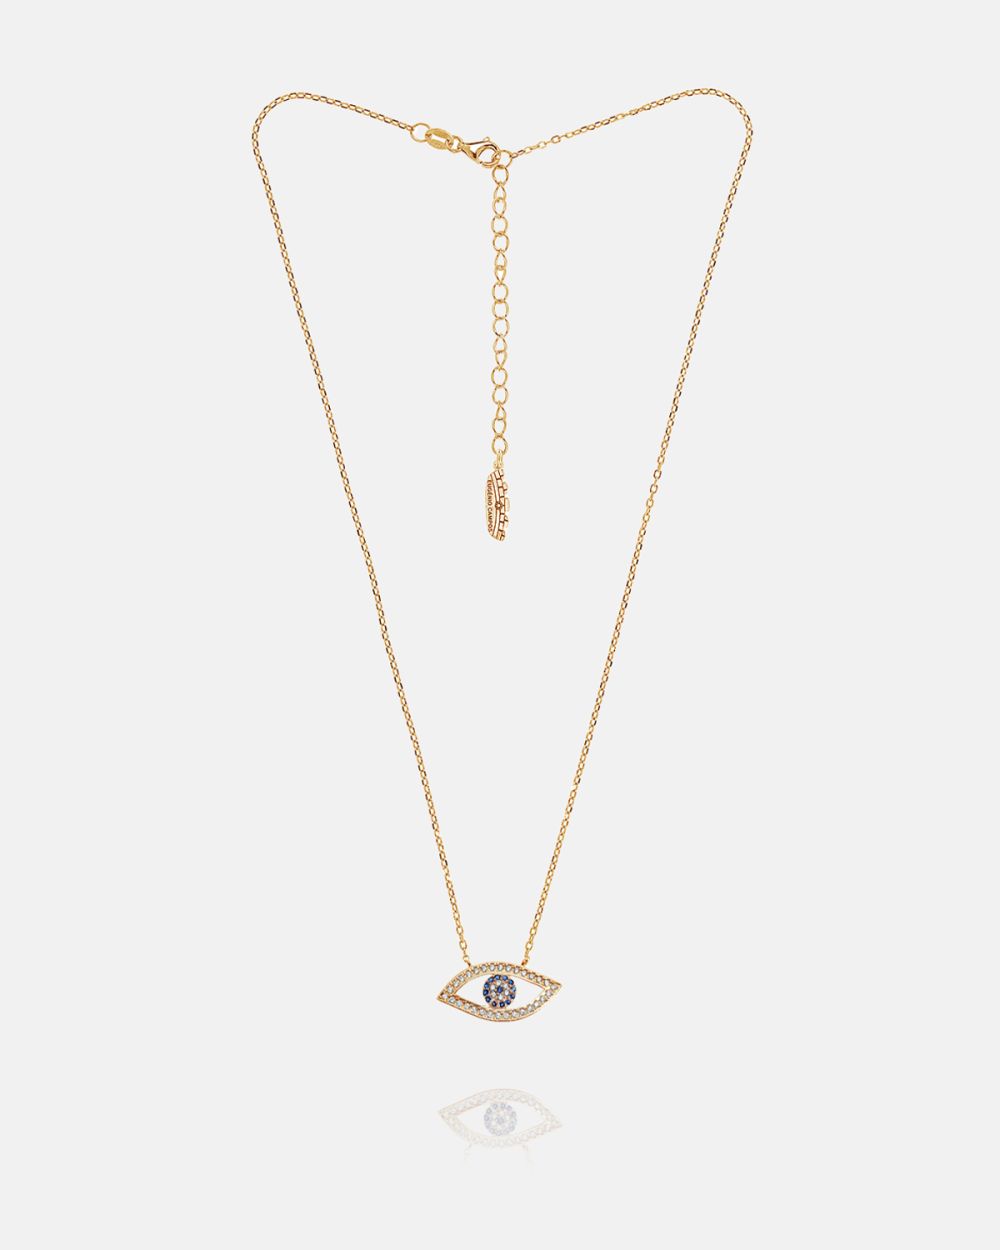 Blue Mystic Eye Necklace in Gold-Plated Silver